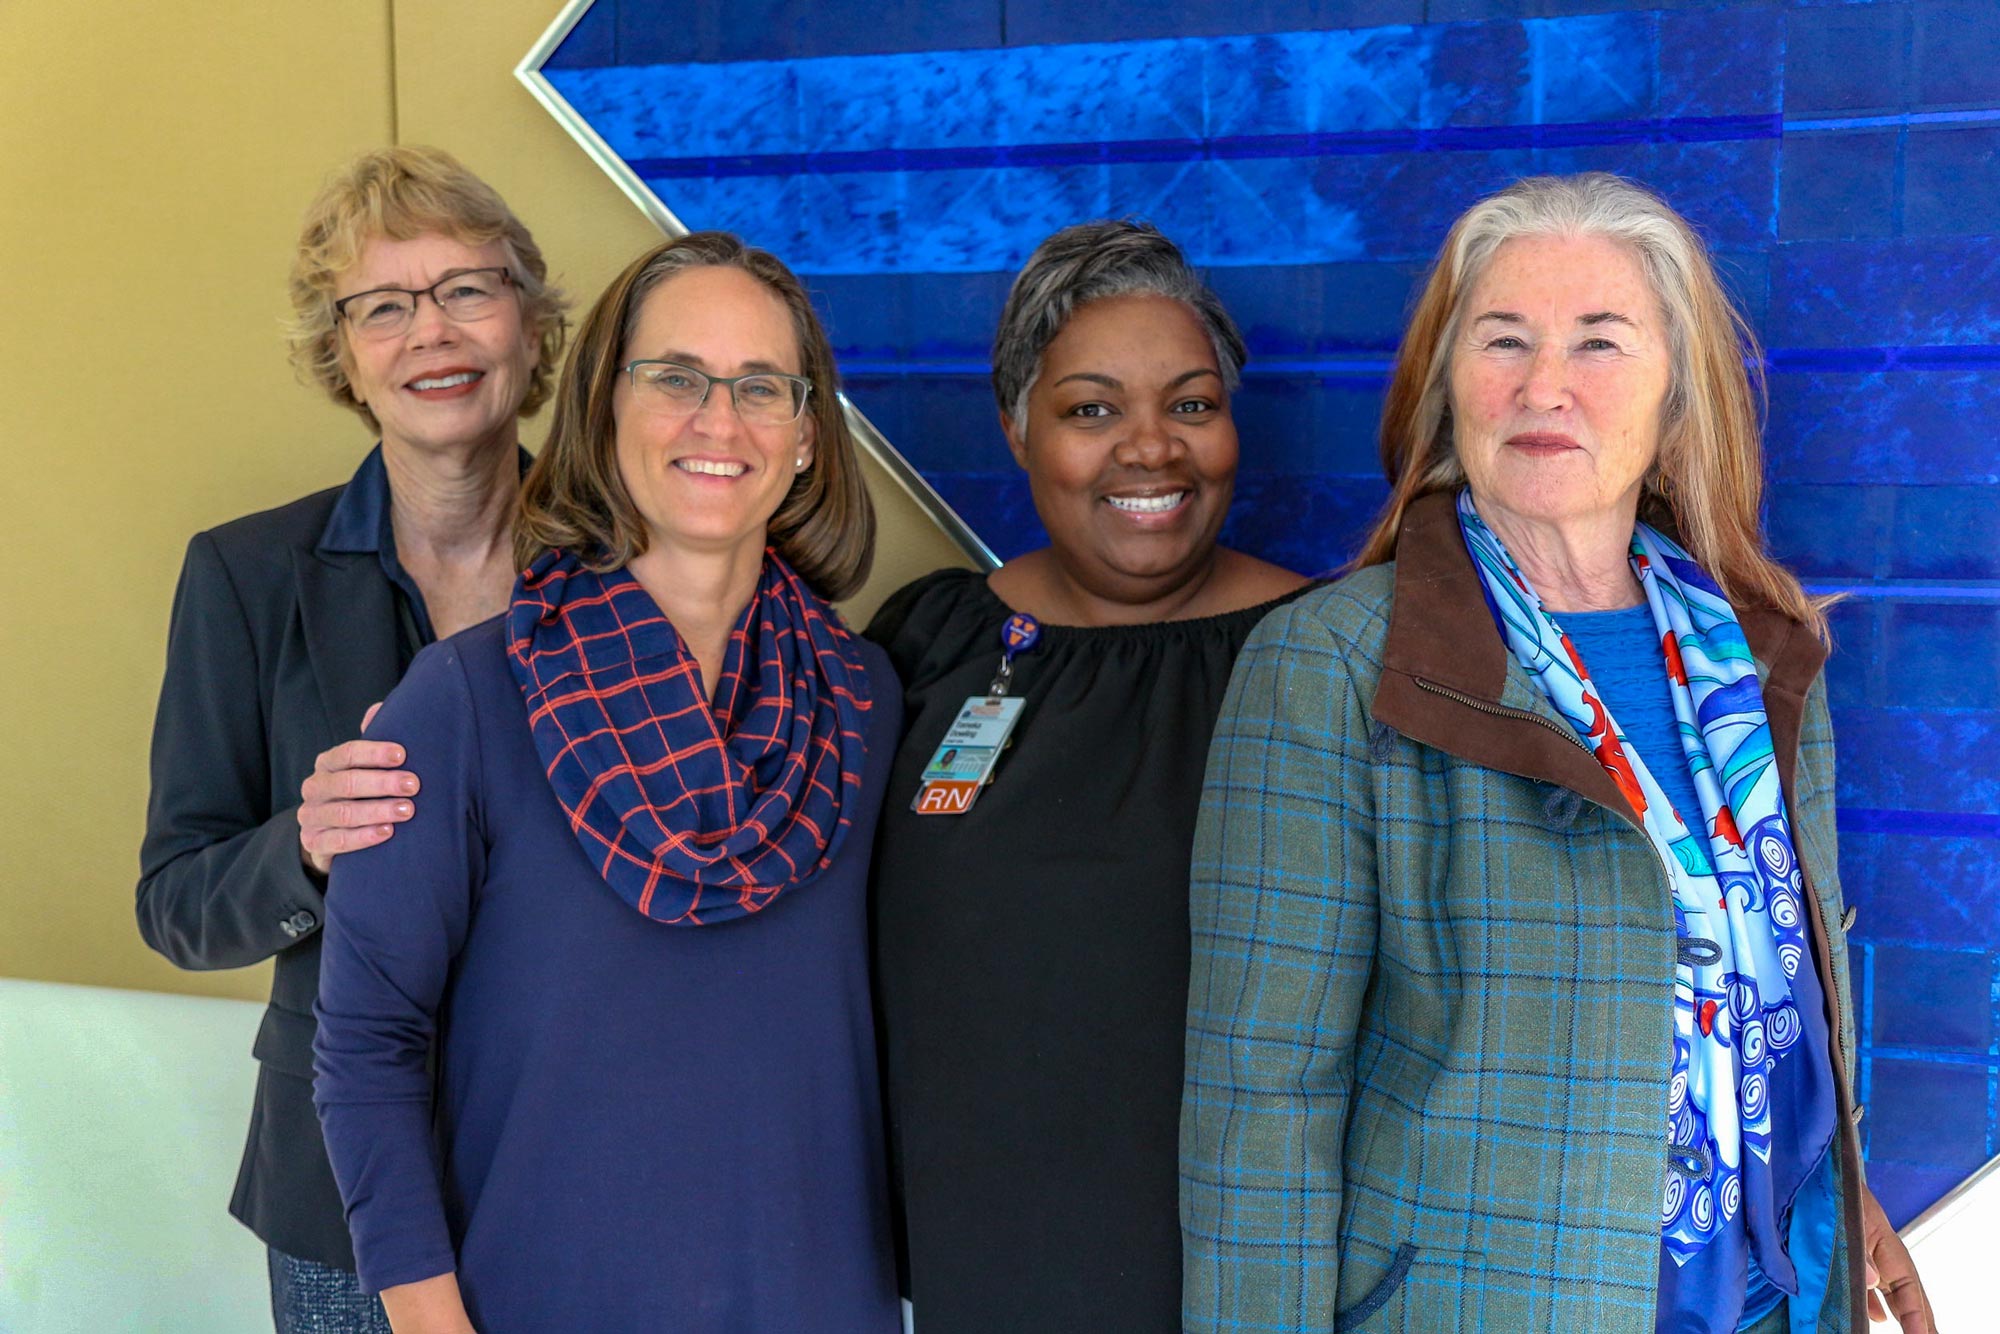 t oversees the new Conway grant initiatives includes, from left, Susan Kools, associate dean for diversity and inclusion; Bethany Coyne, assistant professor and BSN program director; Tomeka Dowling, assistant professor and RN-to-BSN program director; and Christine Kennedy, associate dean for academic progrThe School of Nursing team thaams.